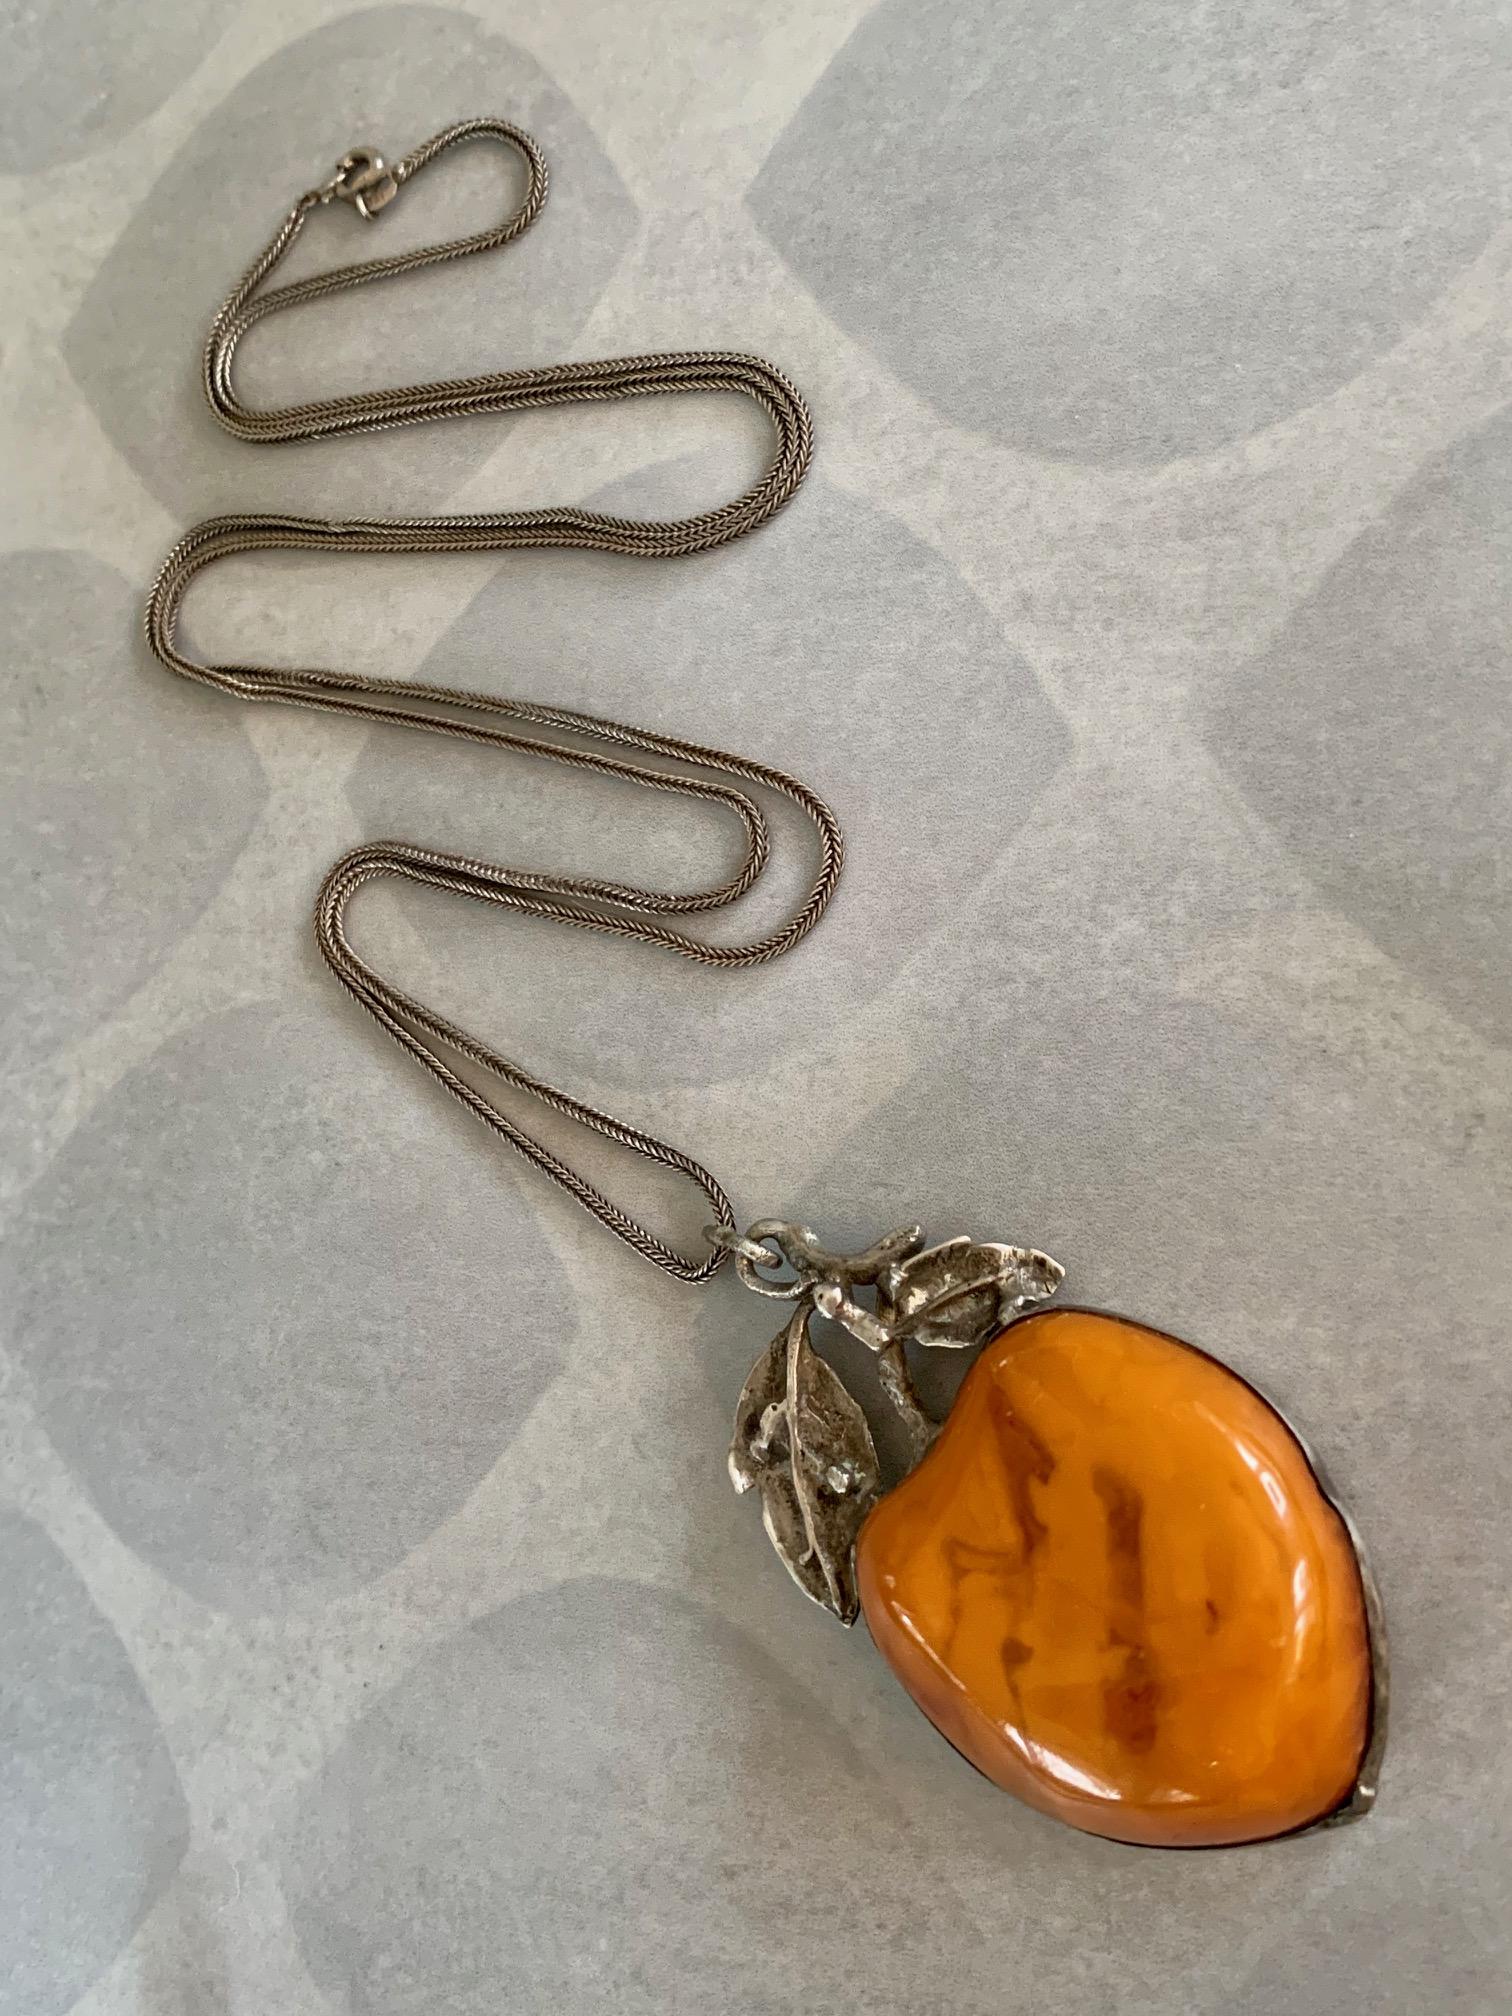 Uncut Vintage Amber Fruit Pendant Long Sterling Silver Fox Tail Chain Necklace